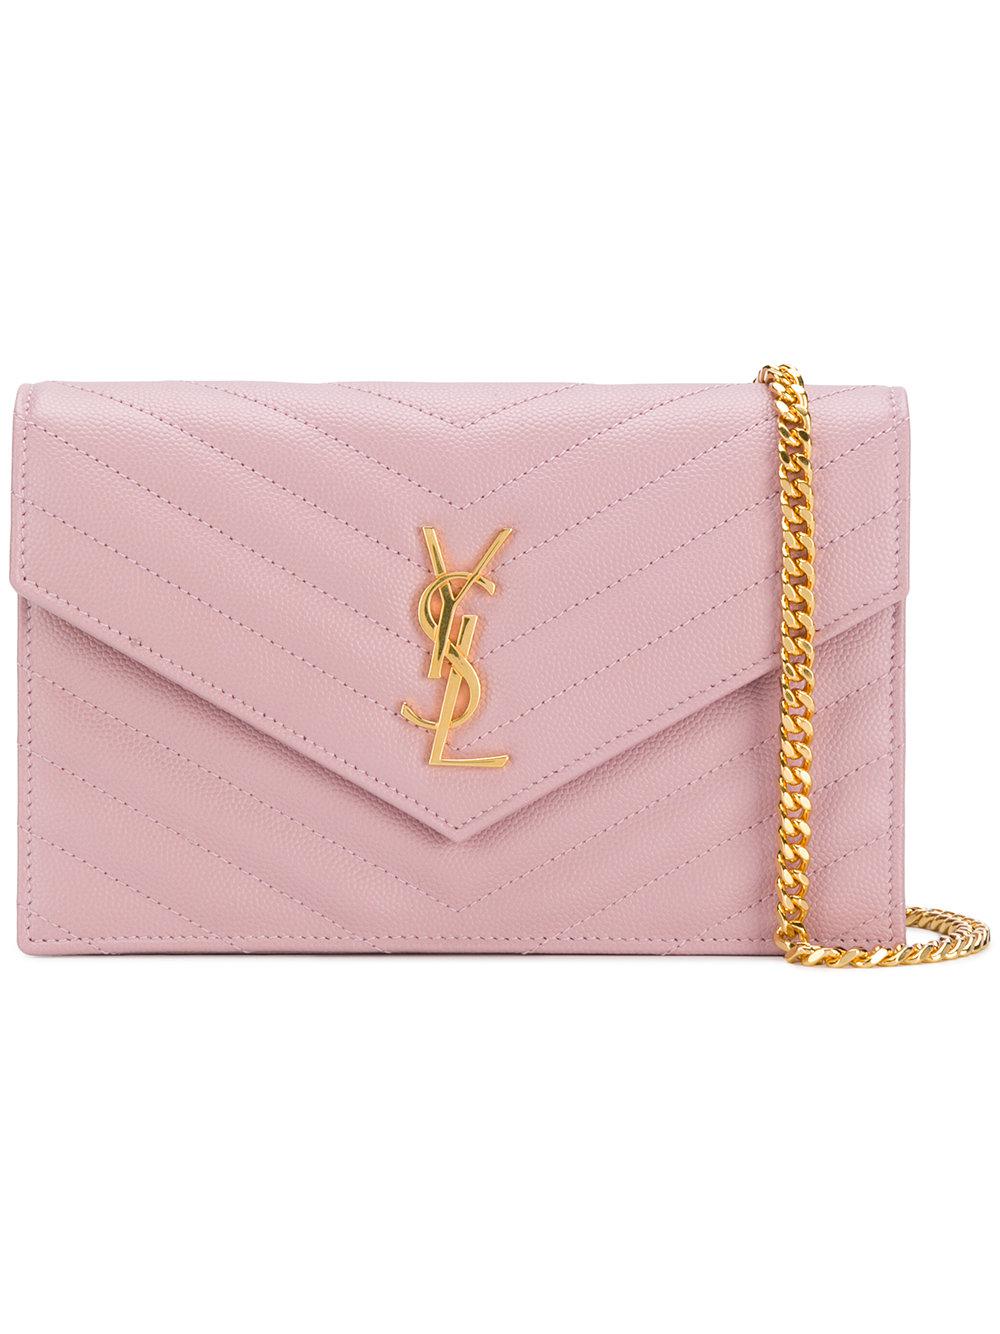 Saint Laurent Envelope Small leather wallet on chain